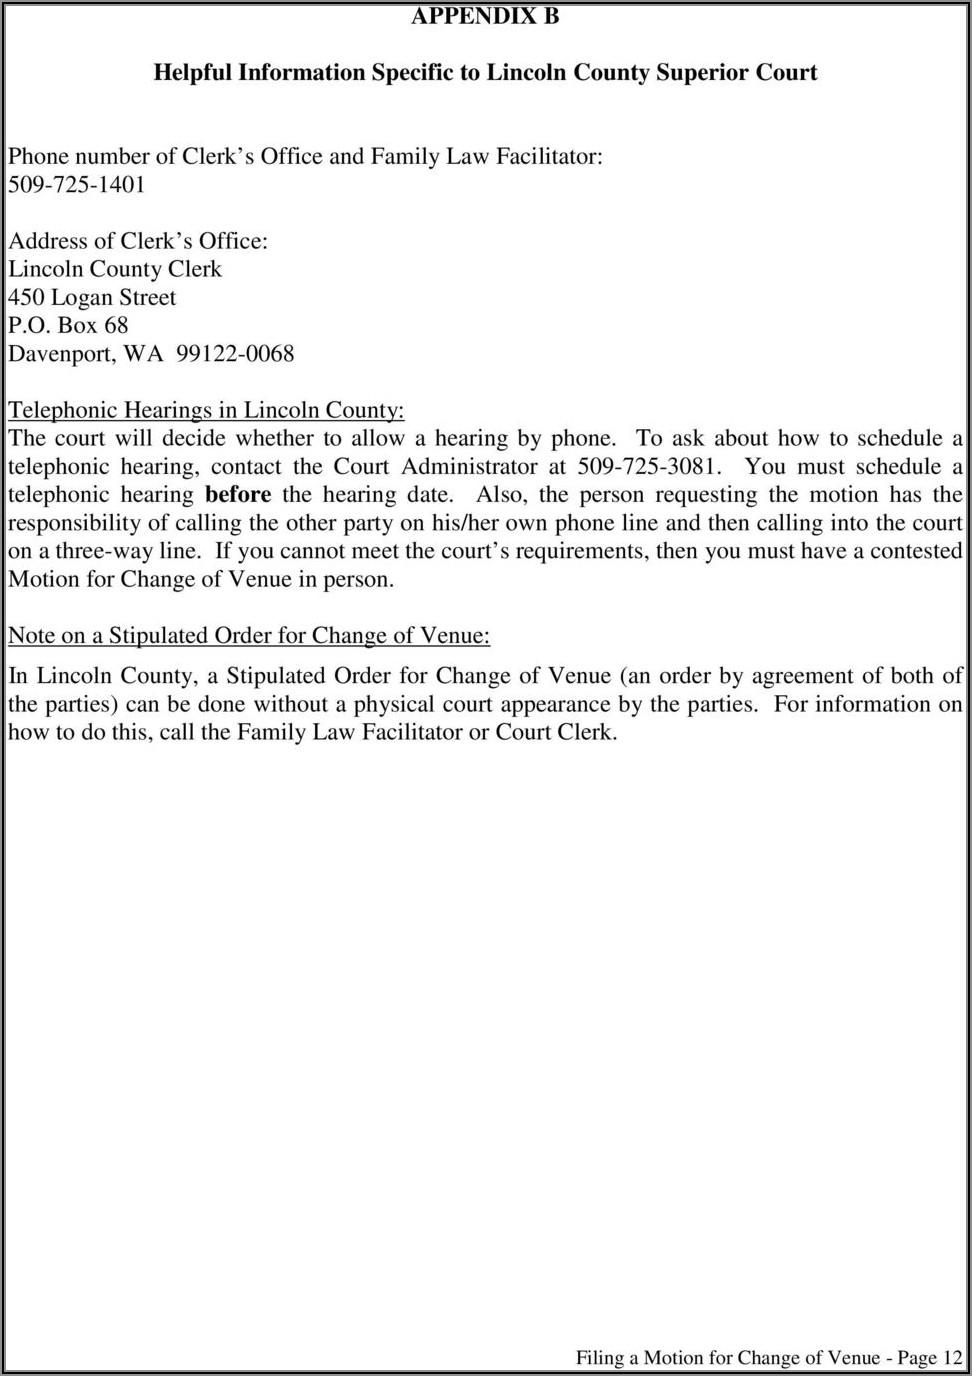 Lincoln County Divorce Filing Fee